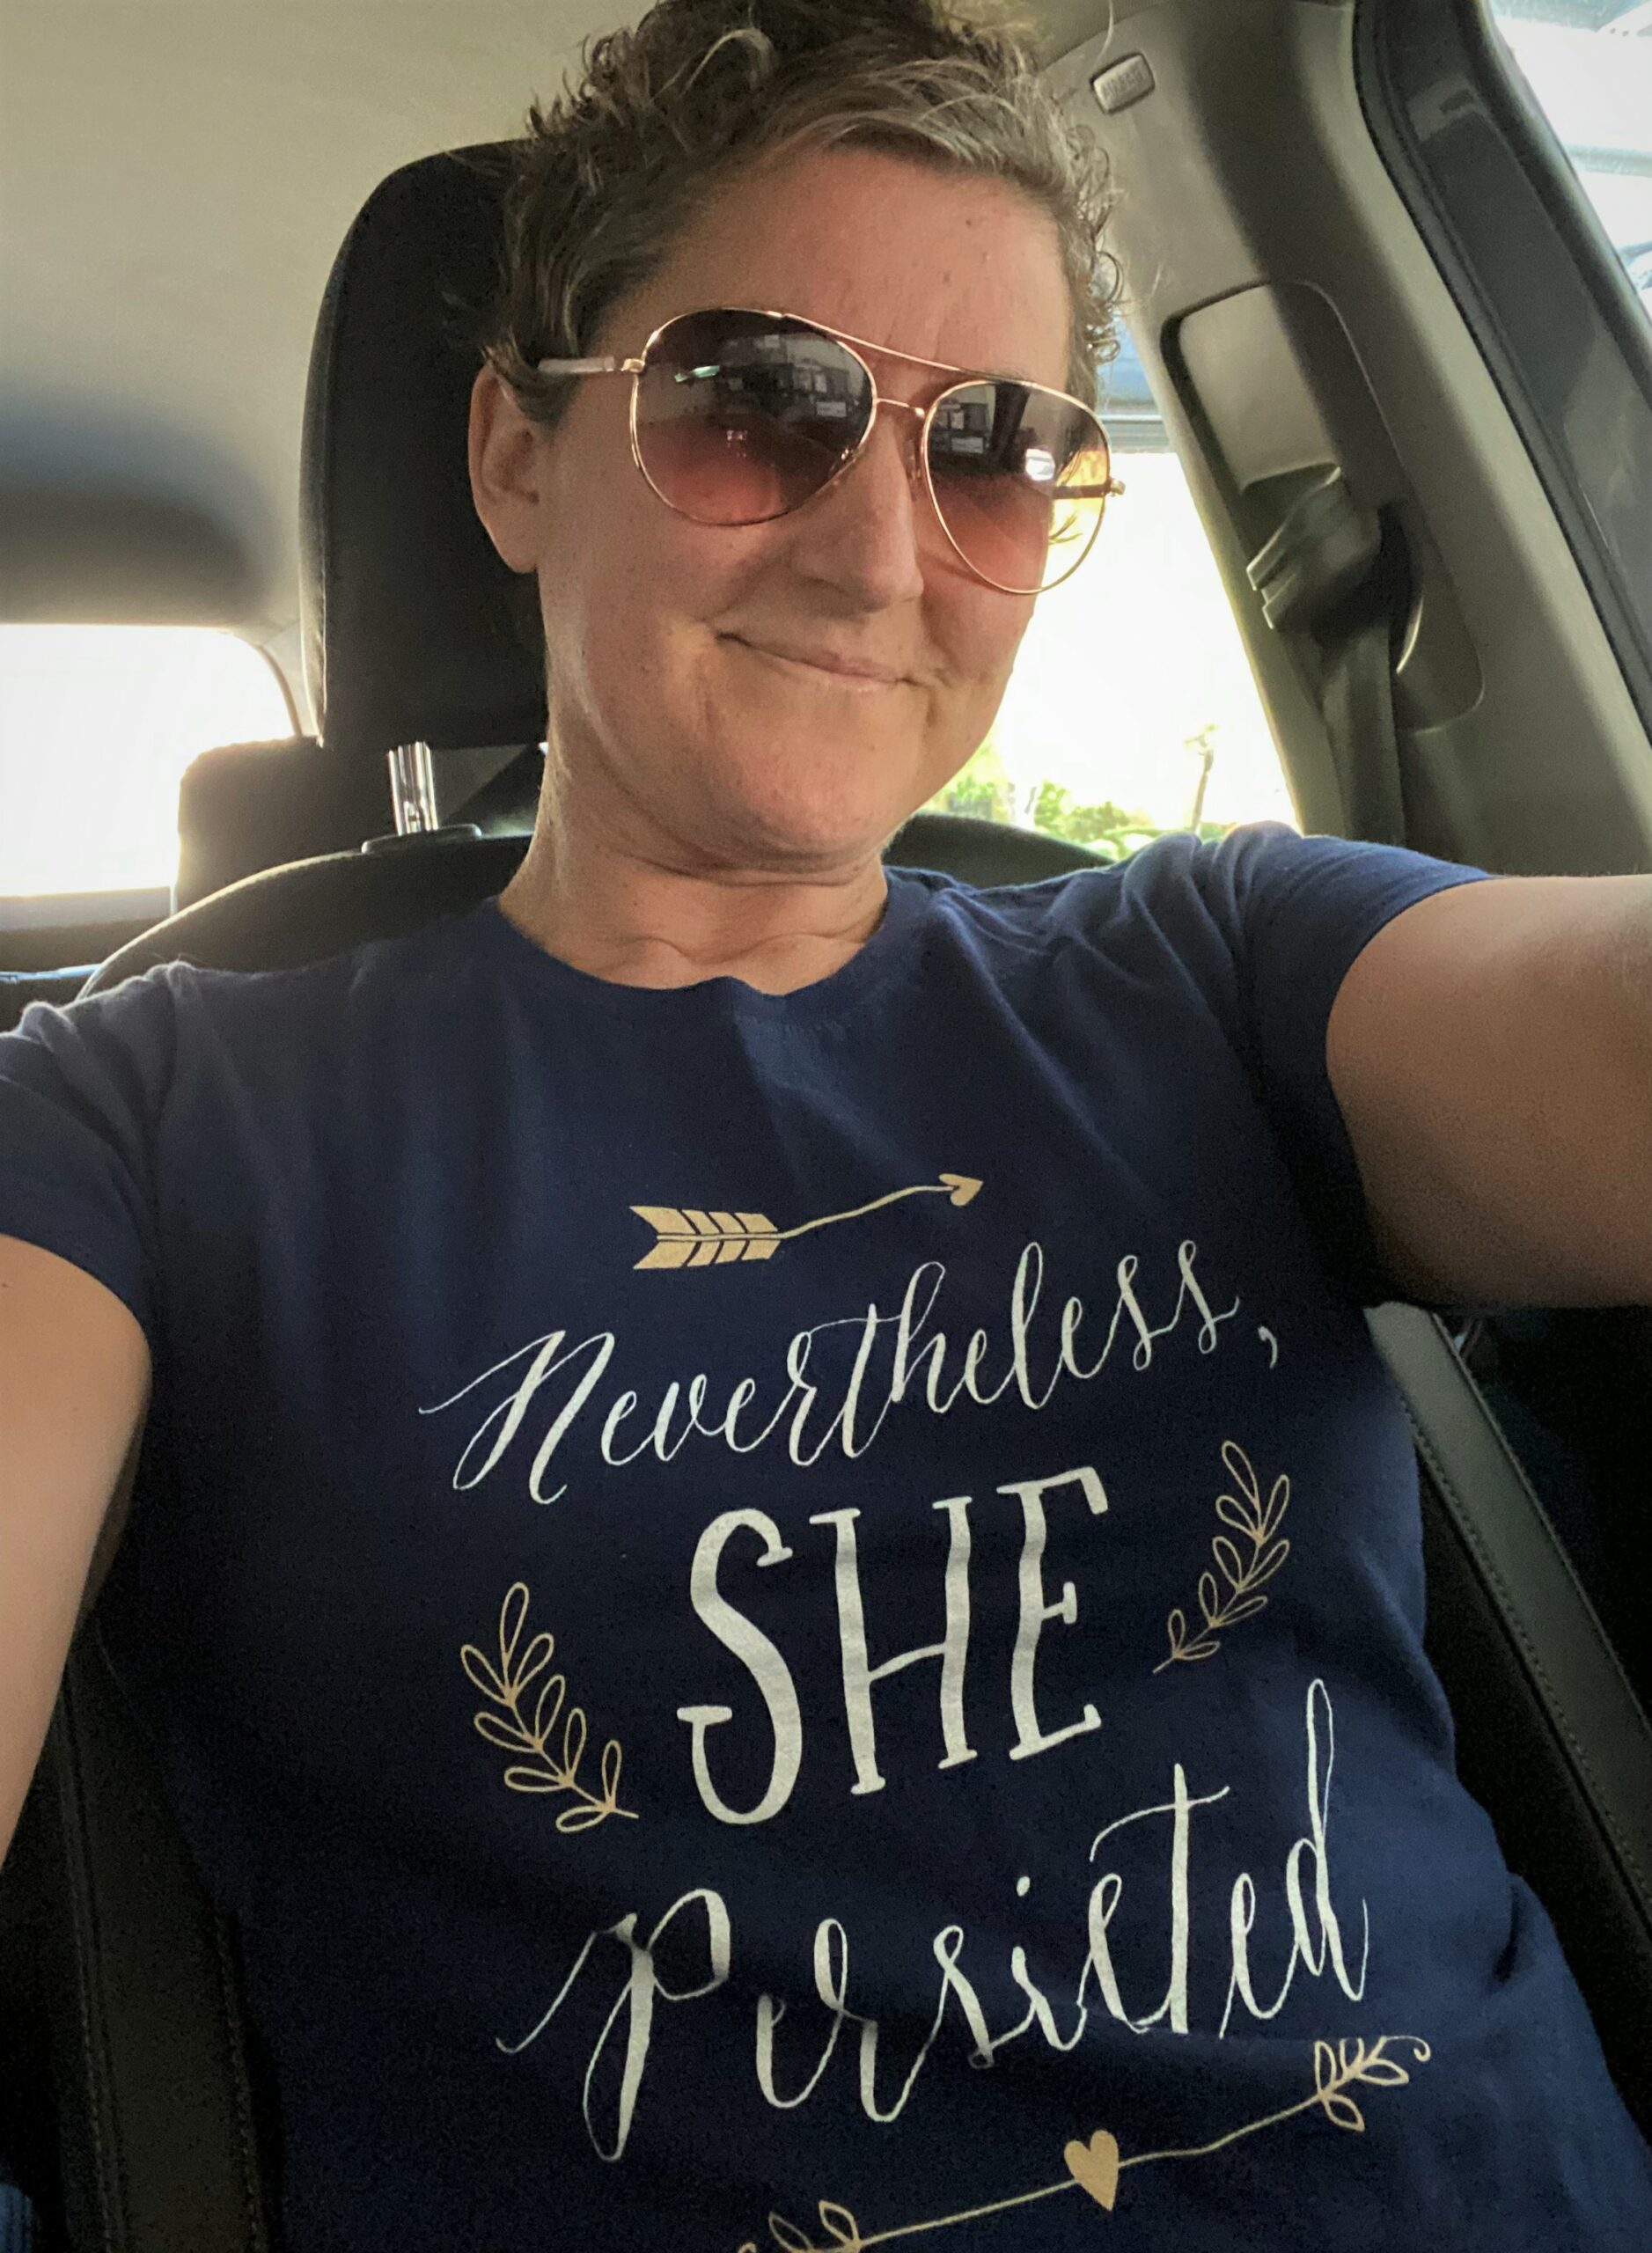 Reagan in car wearing a "Nevertheless, she persisted" T-shirt